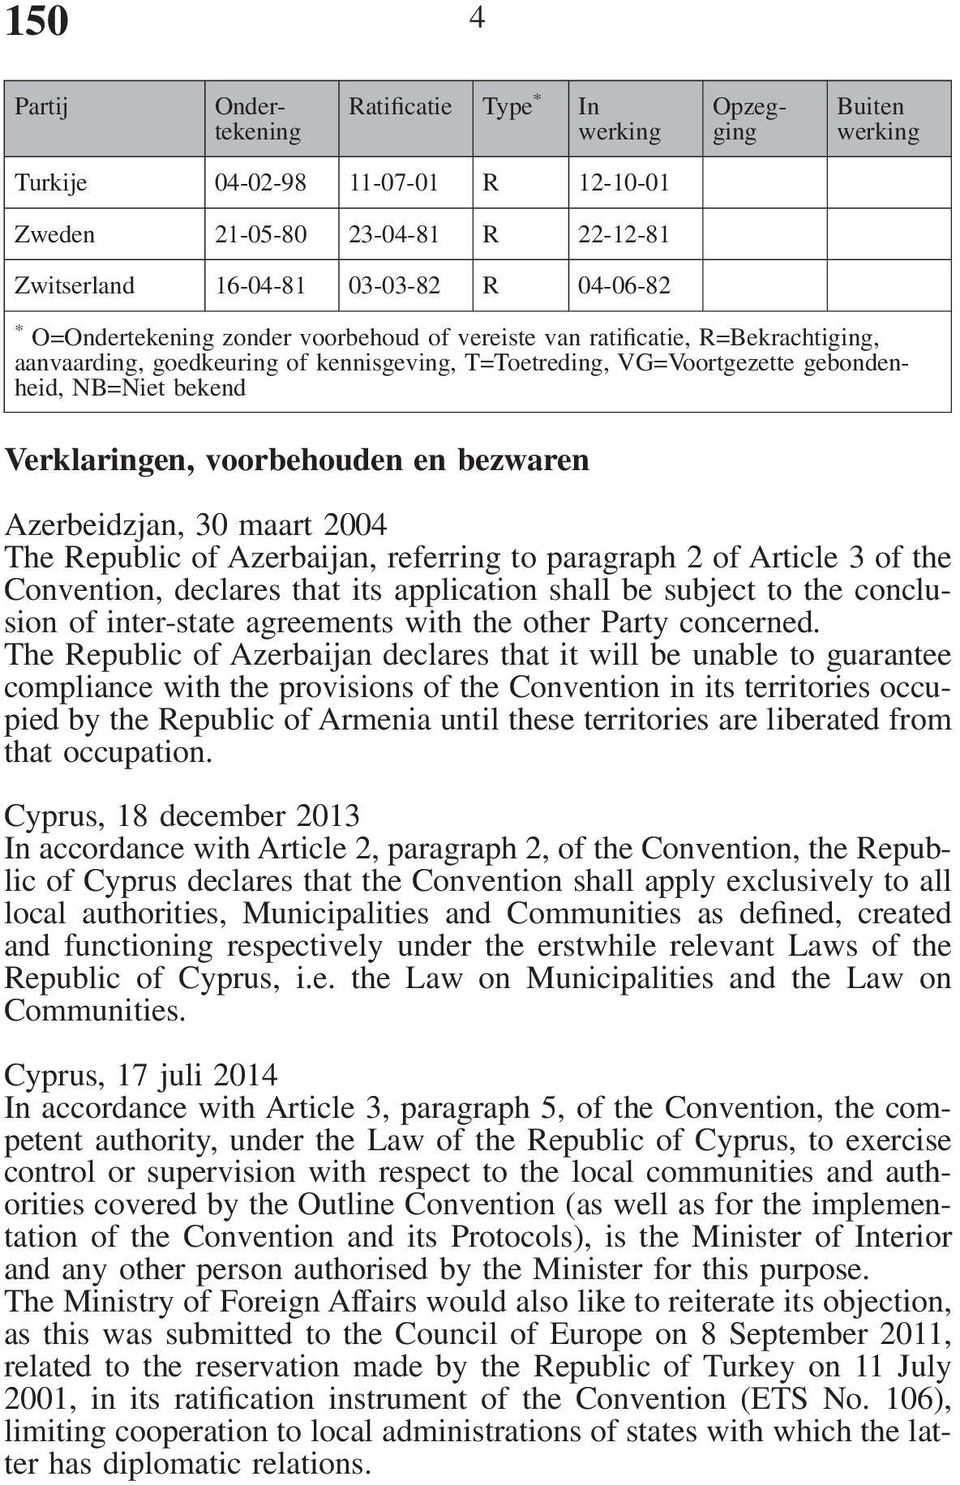 bezwaren Azerbeidzjan, 30 maart 2004 The Republic of Azerbaijan, referring to paragraph 2 of Article 3 of the Convention, declares that its application shall be subject to the conclusion of